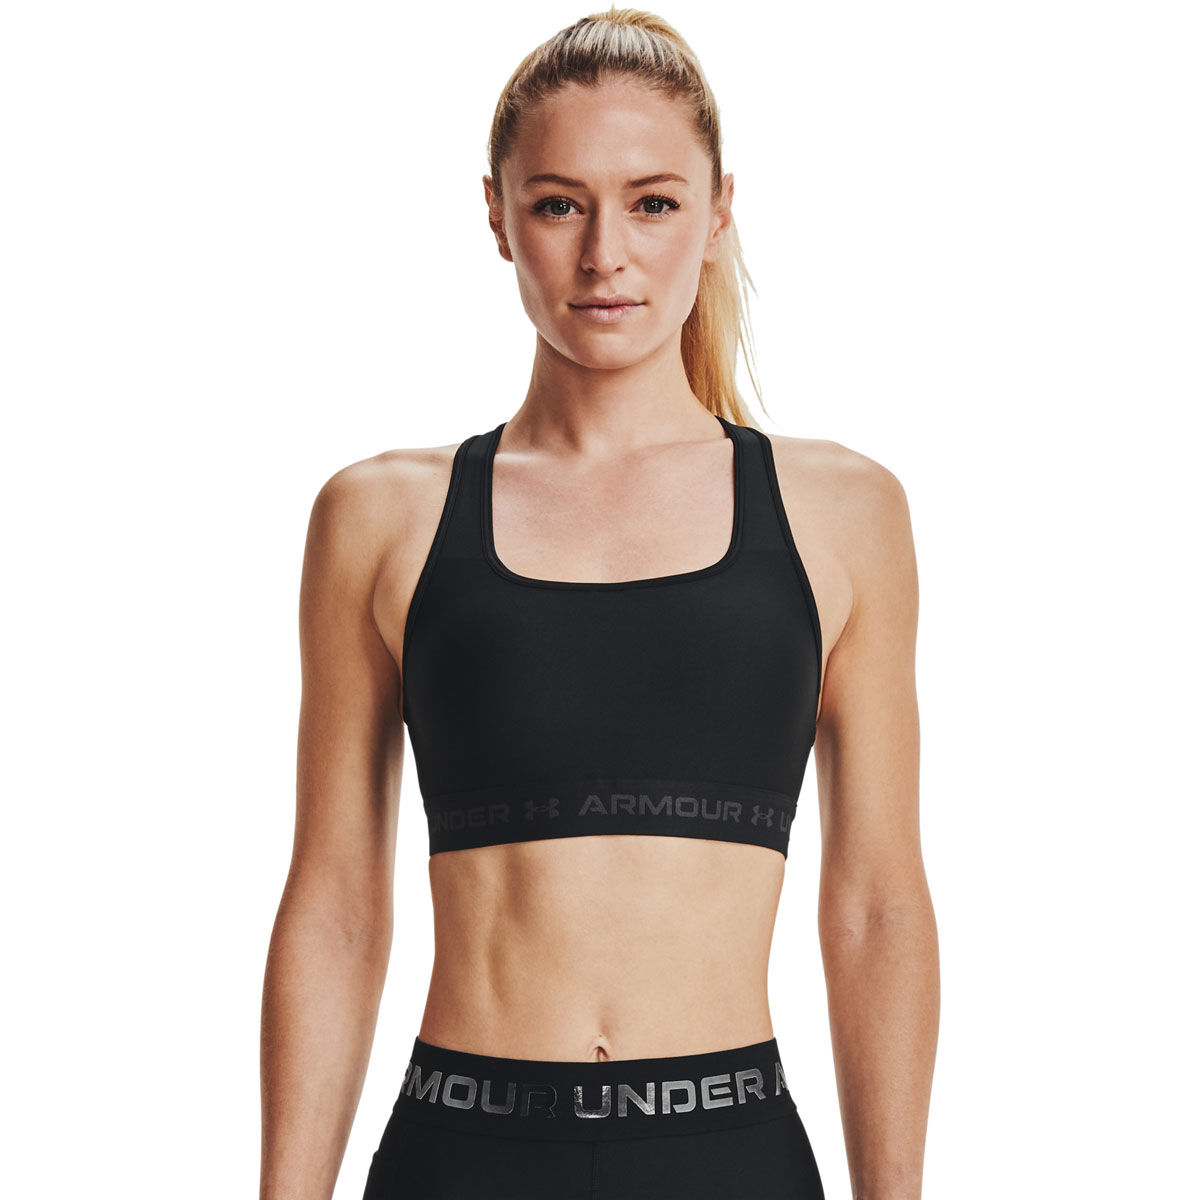 Champion Sports Bra Women's XL Quick Double Dry Moderate Support